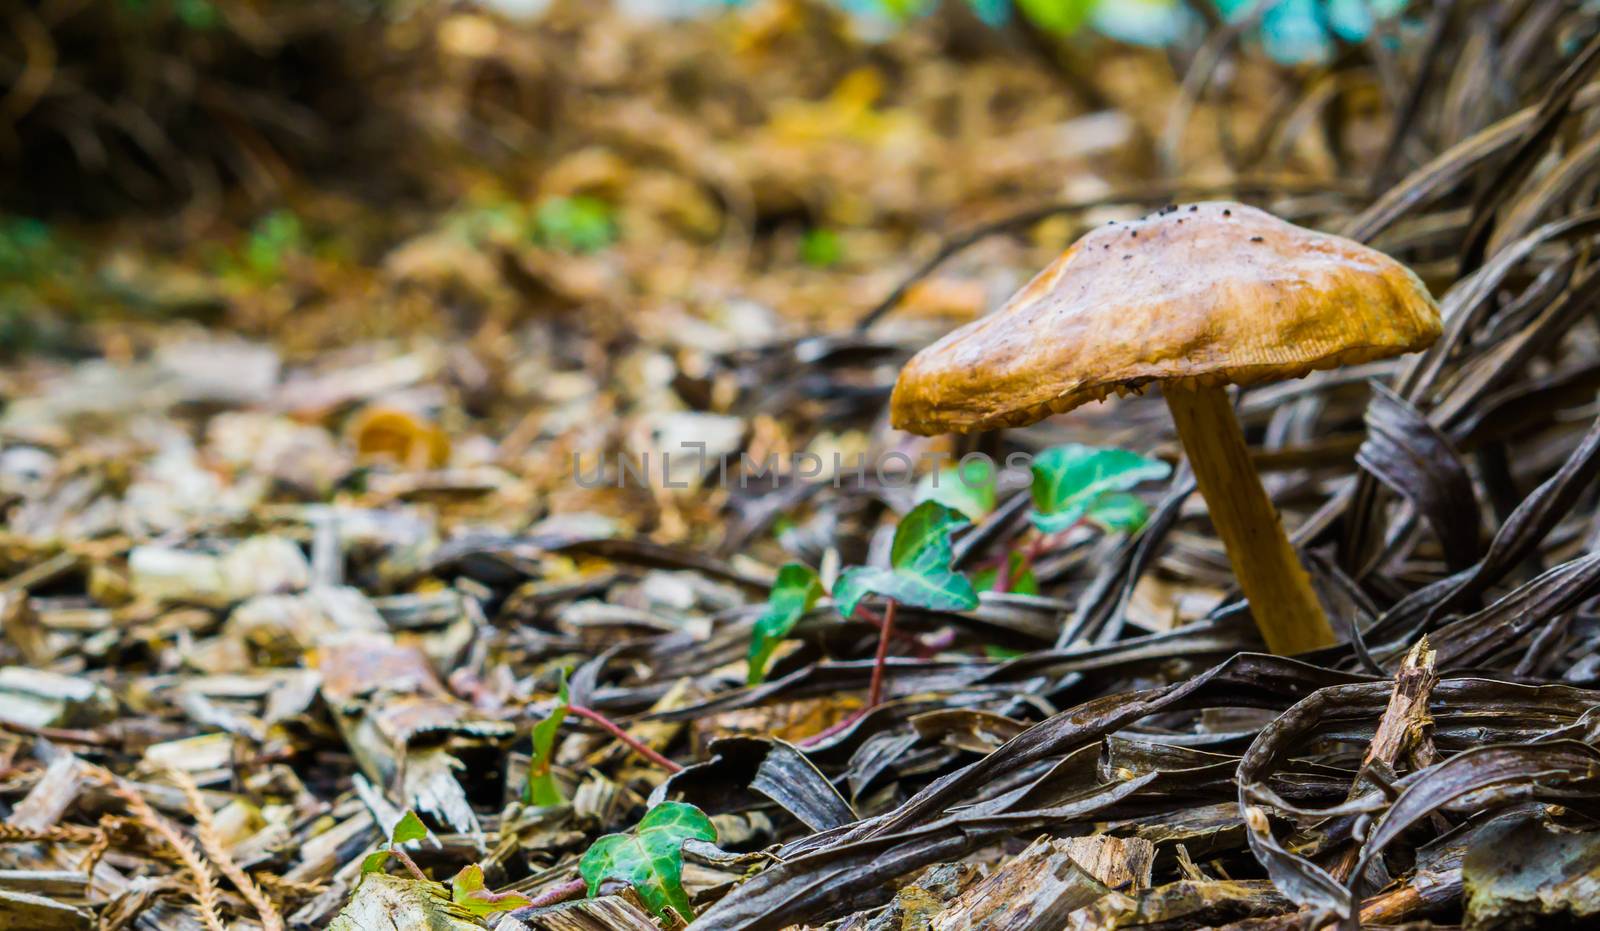 brown round mushroom in the forest with woodchips on the ground nature forest background by charlottebleijenberg